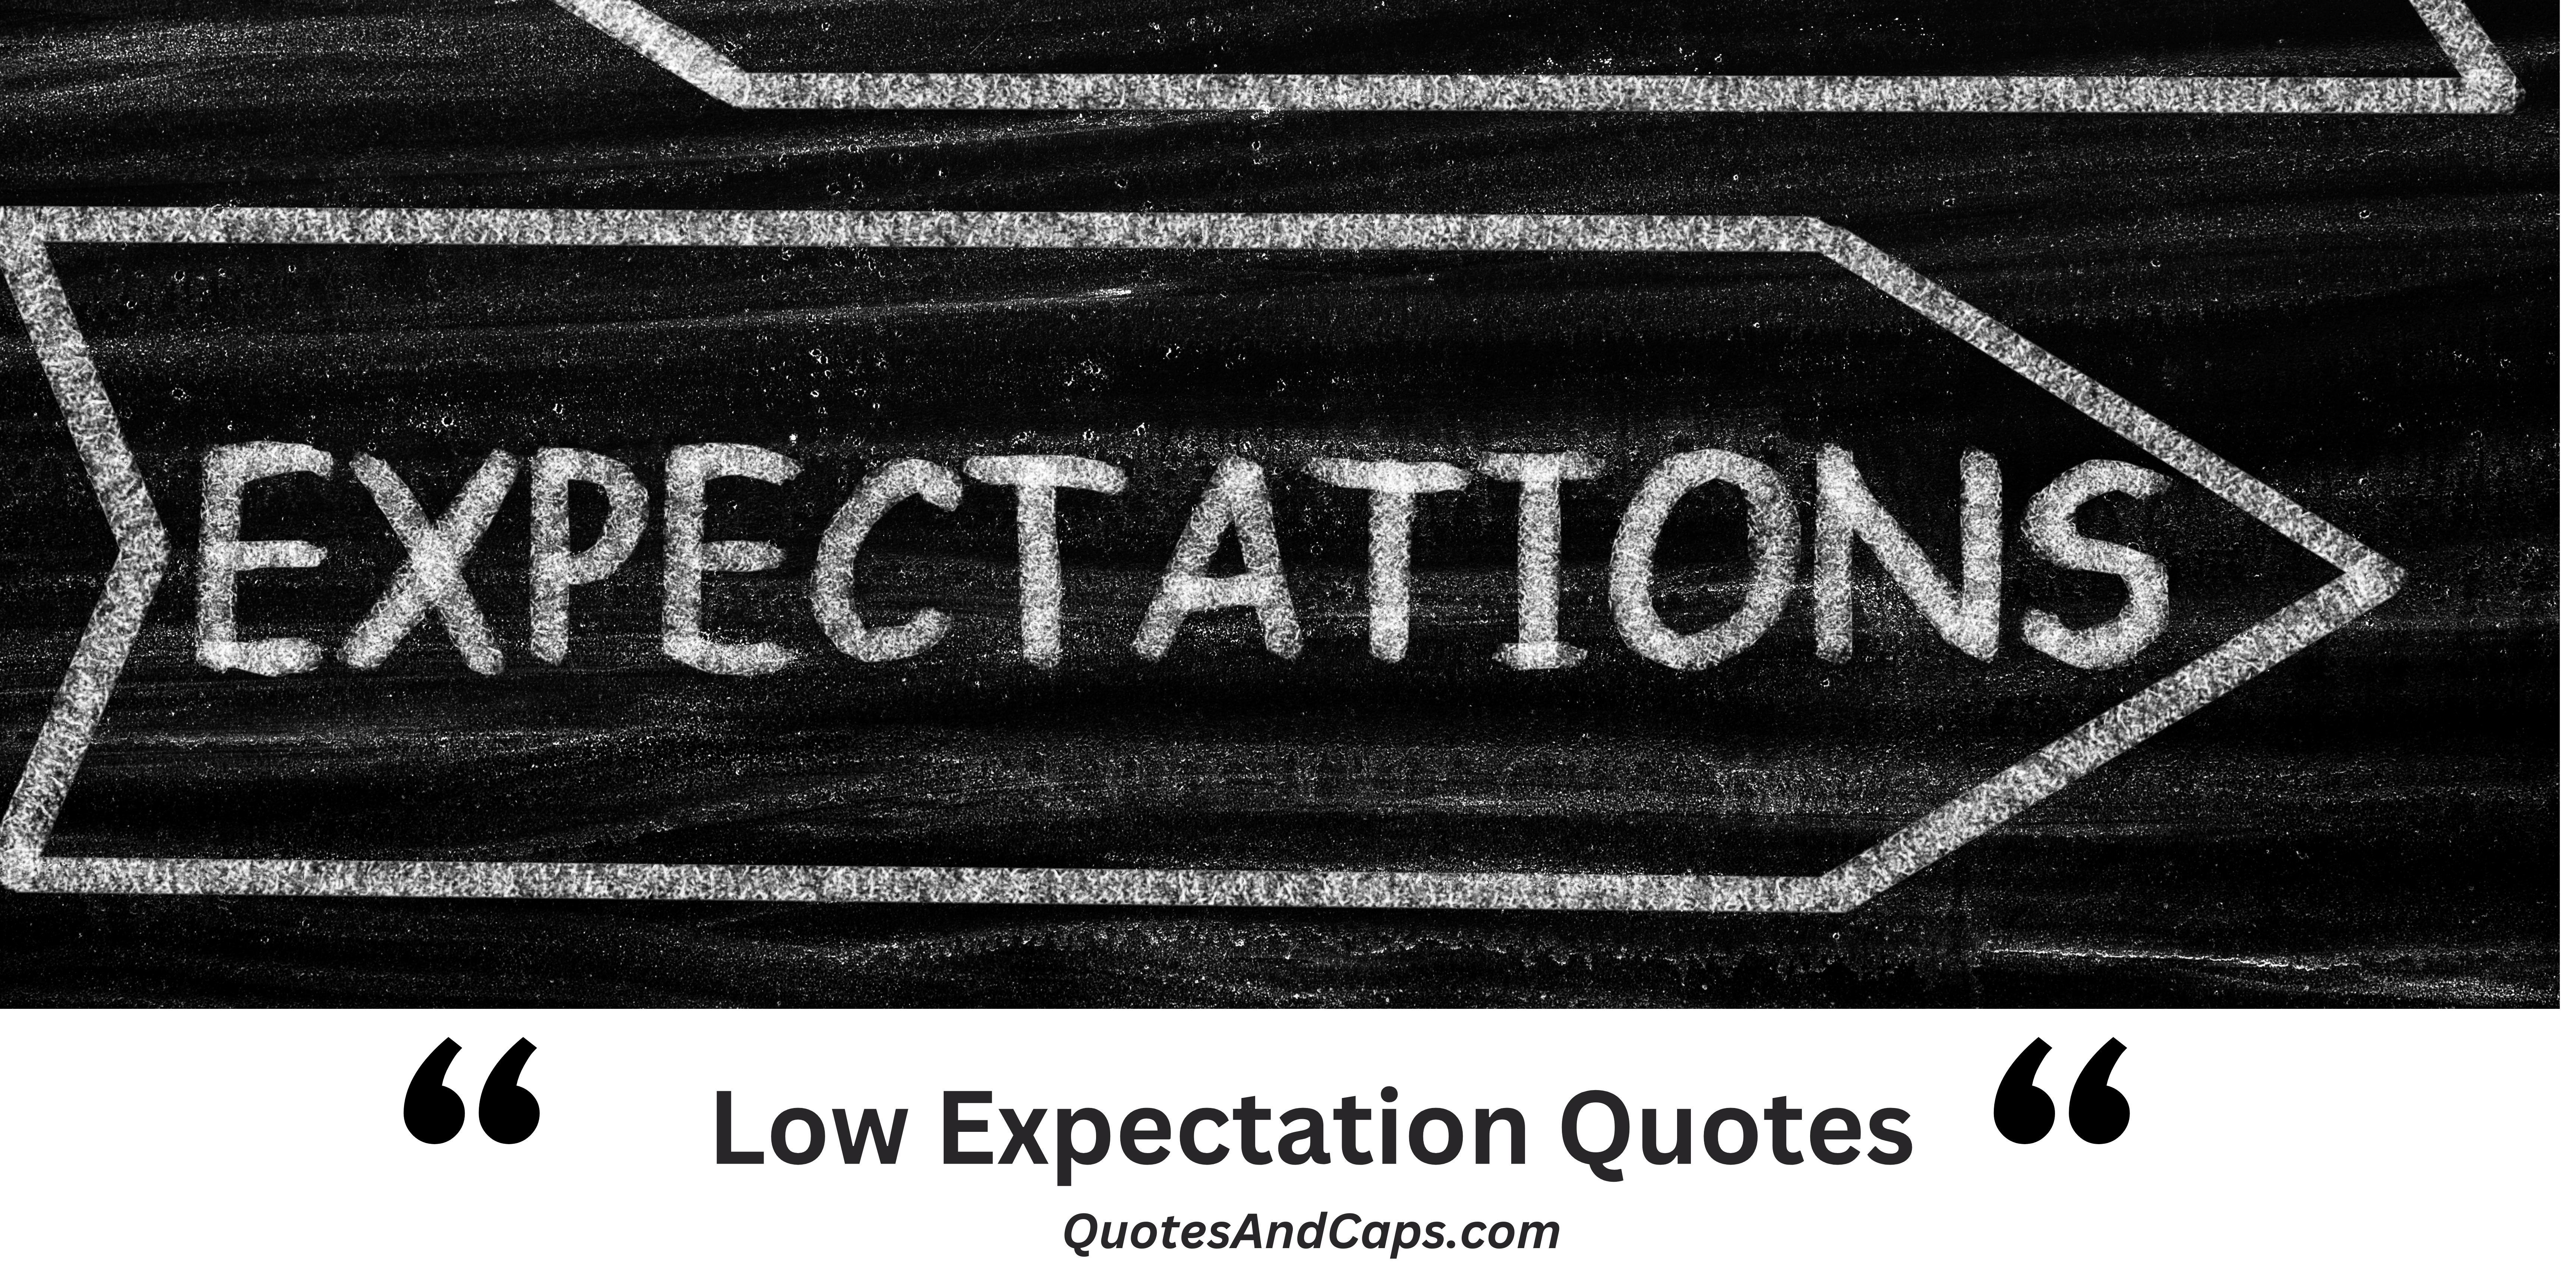 Low Expectation Quotes